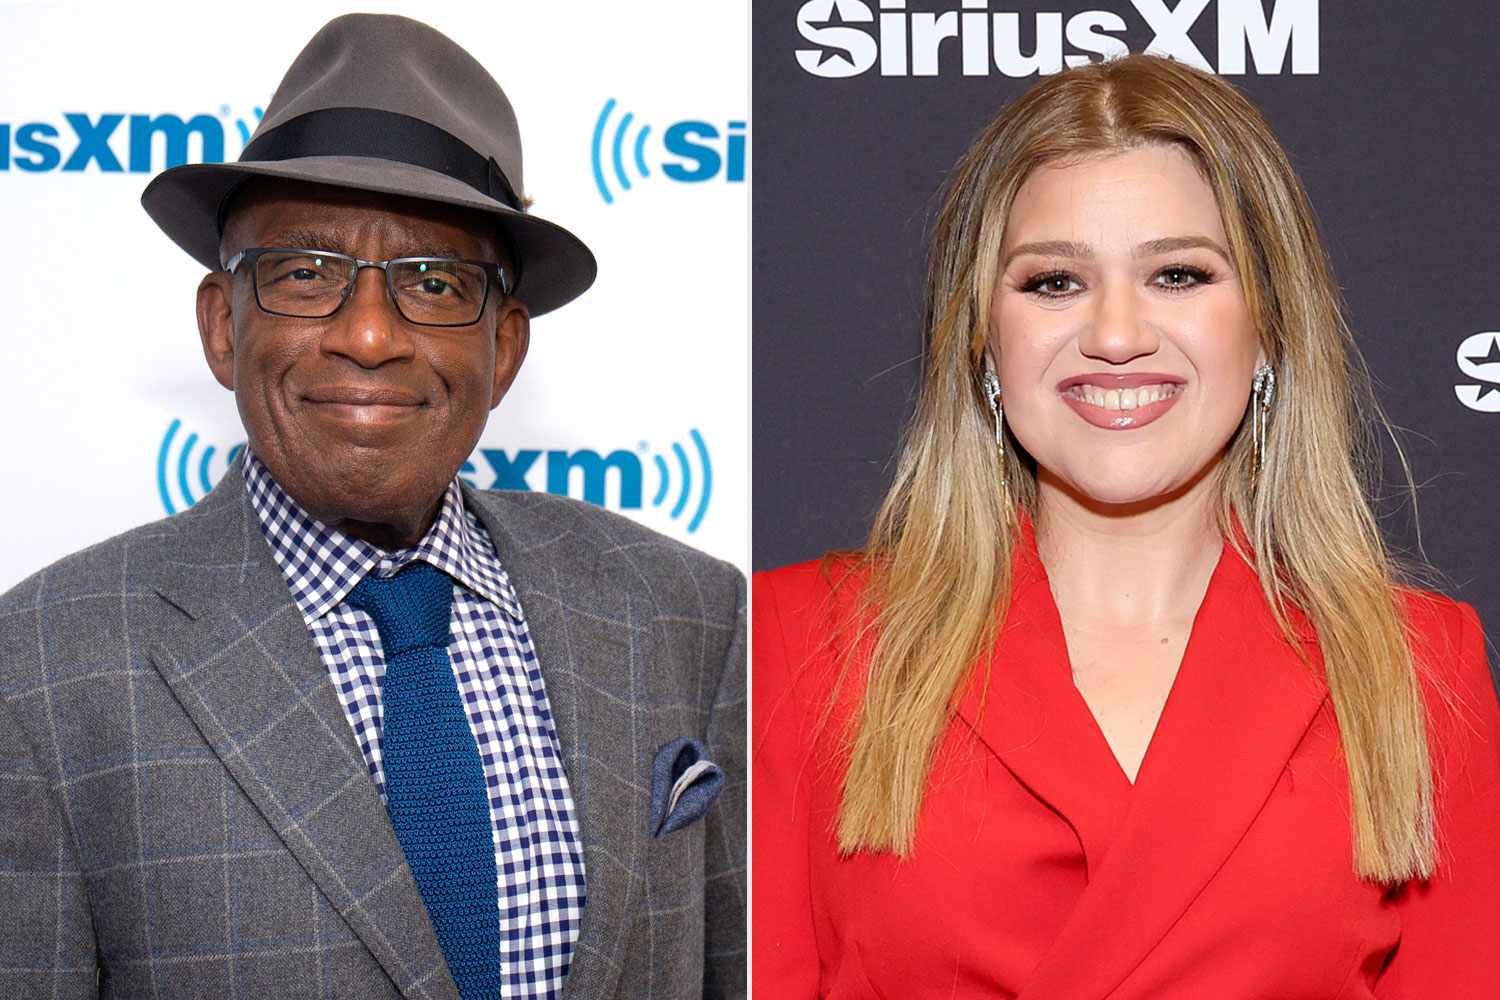 Al Roker Tells Critics to 'Back Off' Judging Kelly Clarkson for Using Weight Loss Drugs